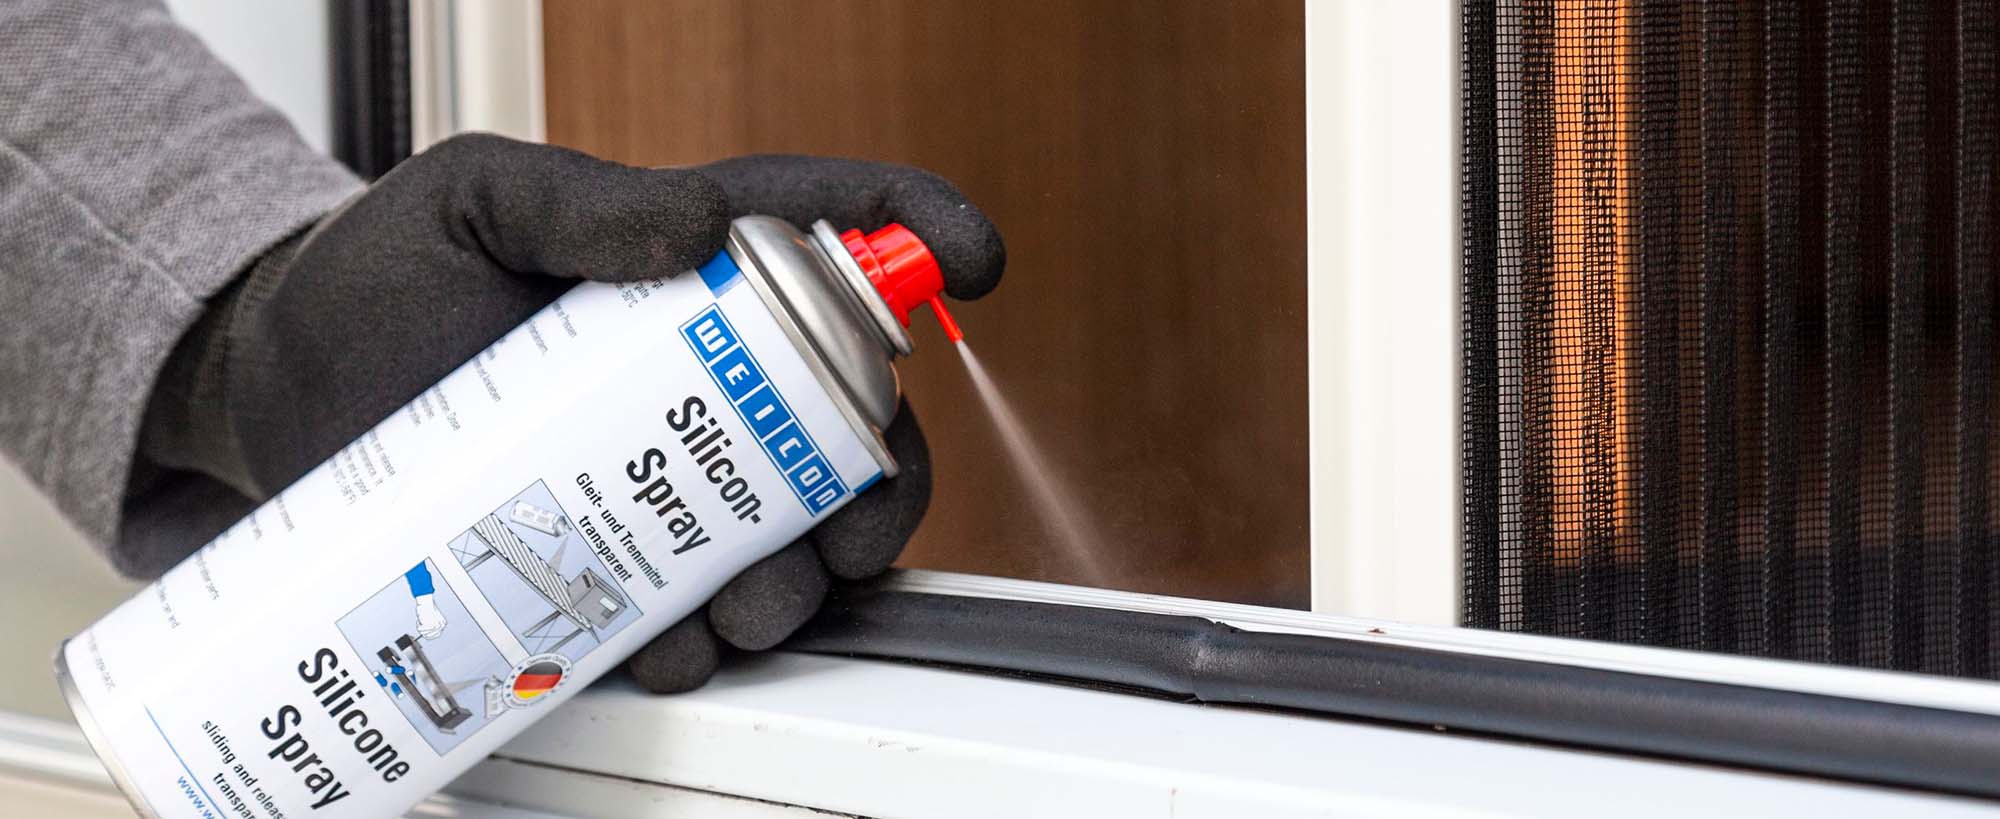 https://www.swiftsupplies.com.au/assets/images/News%20and%20Articles/2021/The%20Many%20Ways%20You%20Can%20Use%20Silicone%20Spray/Window%20Seals%20Lubricated%20with%20Weicon%20Silicone%20Spray.jpg